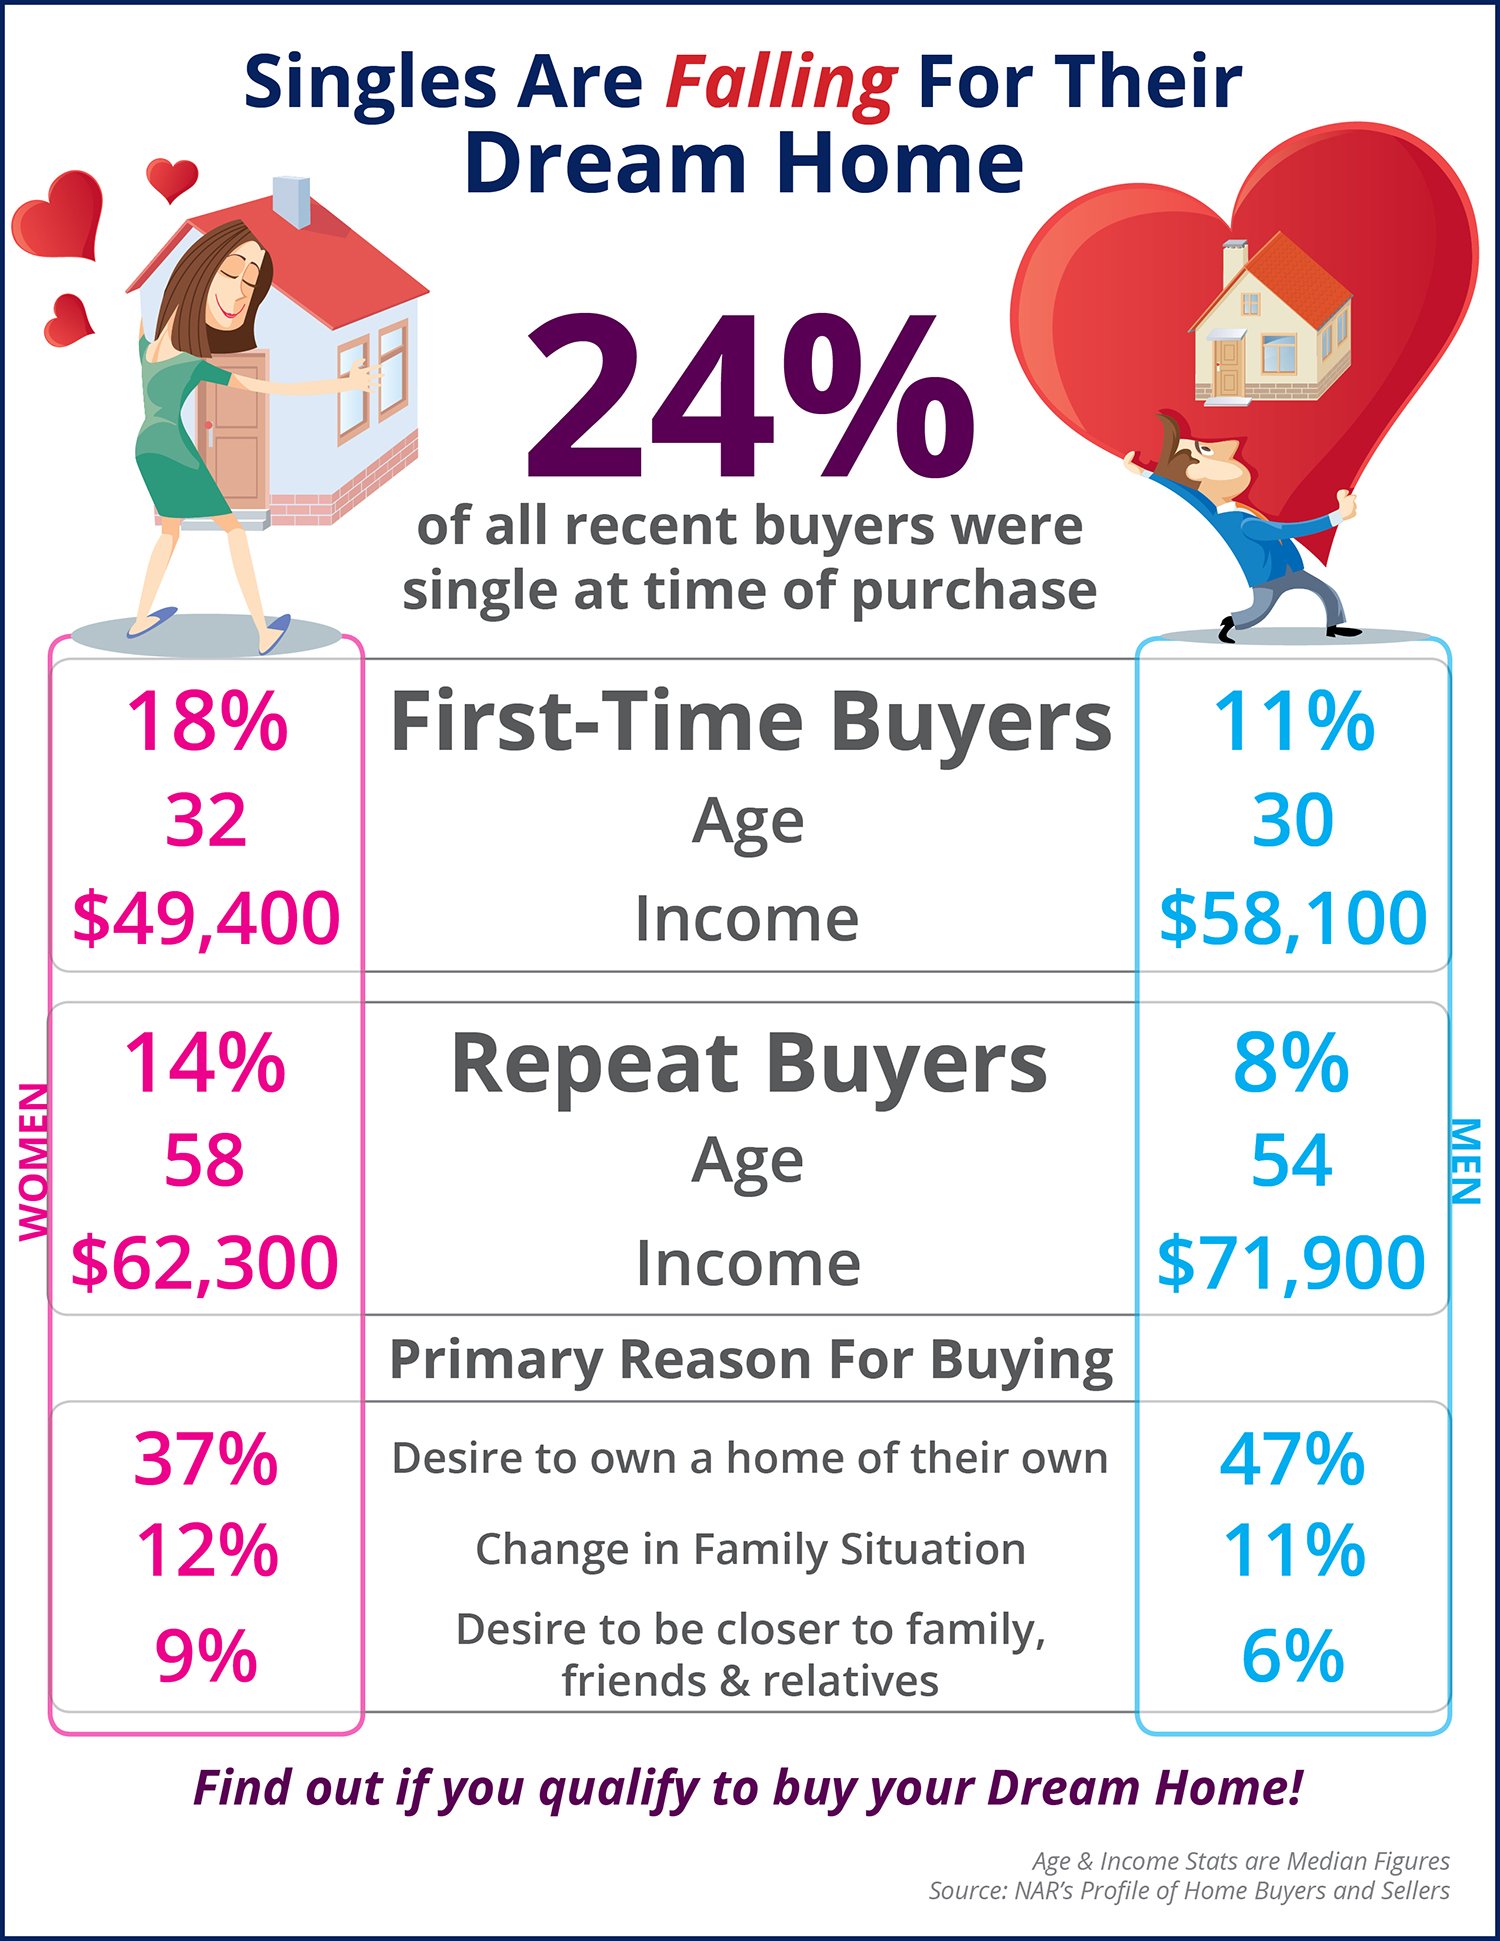 Singles Are Falling For Their Dream Home | Simplifying The Market